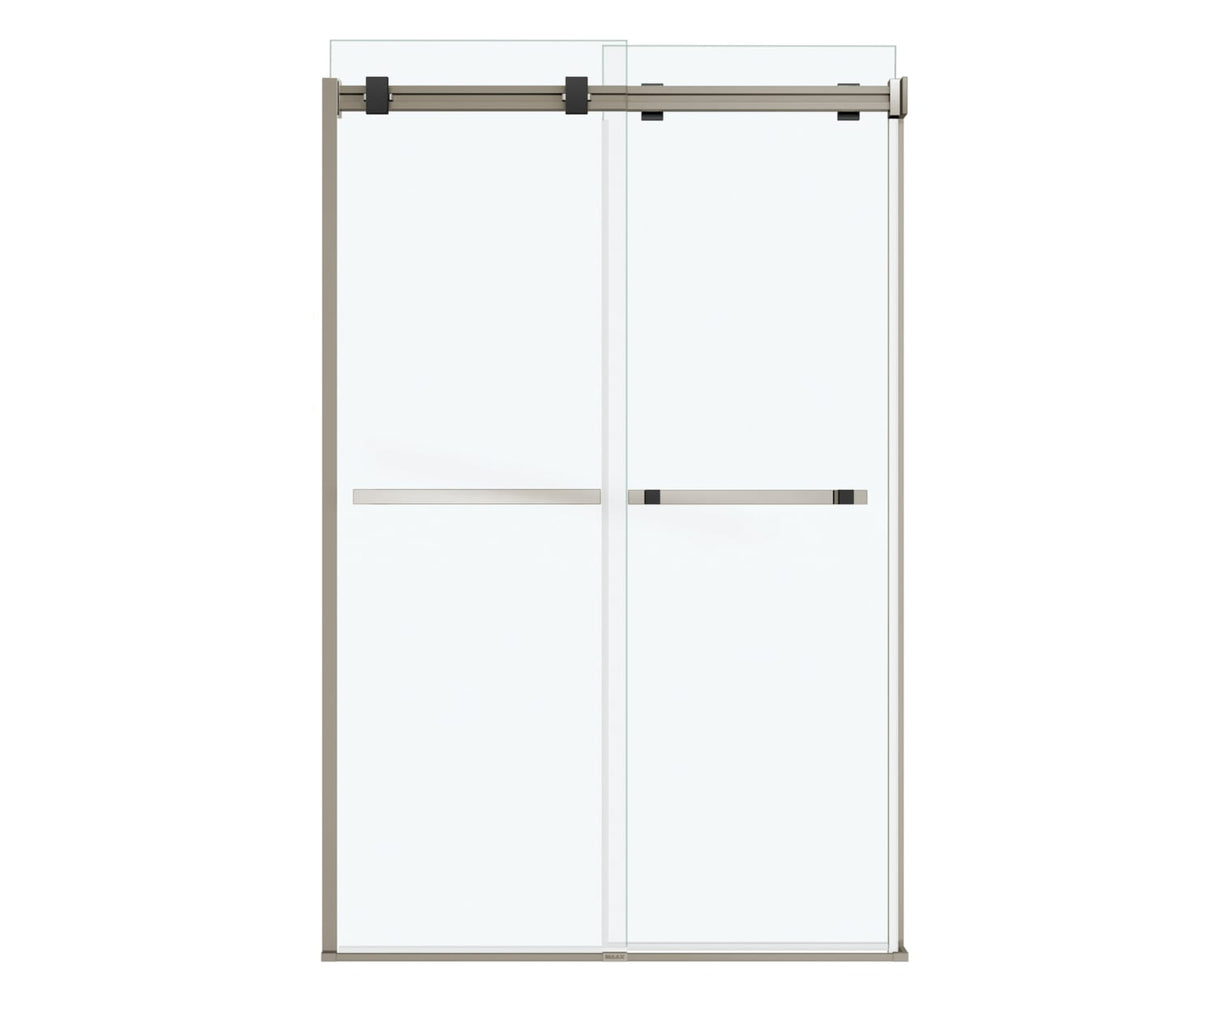 MAAX 136271-900-289-000 Duel 44-47 x 70 ½-74 in. 8 mm Bypass Shower Door for Alcove Installation with Clear glass in Brushed Nickel & Matte Black